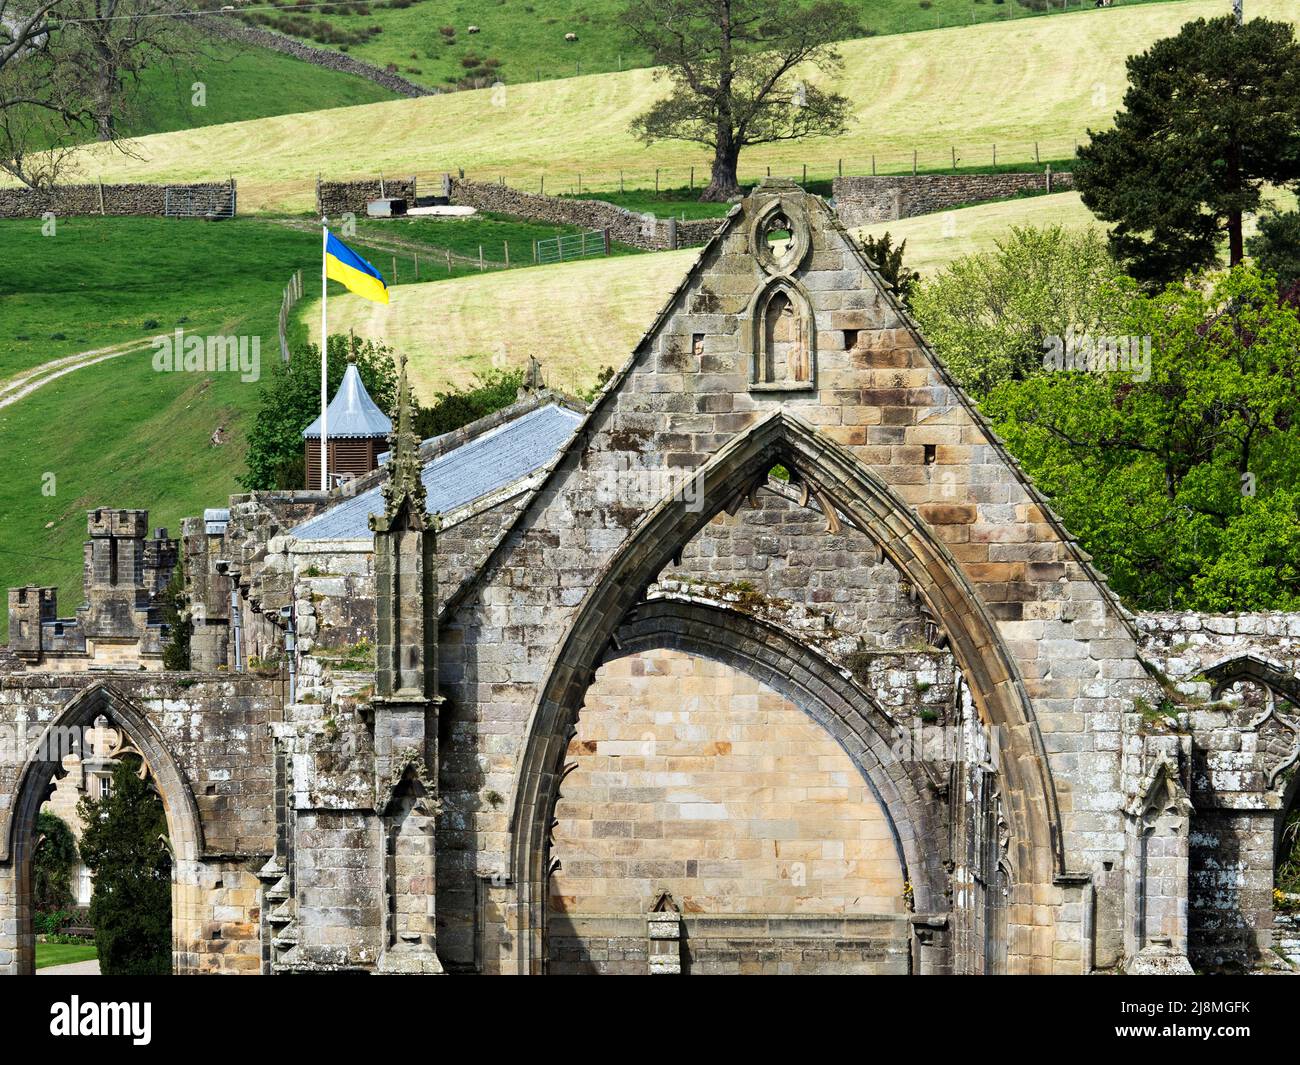 Flag of Ukraine flying over the church and priory ruins in May 2022 at Bolton Abbey North Yorkshire England Stock Photo